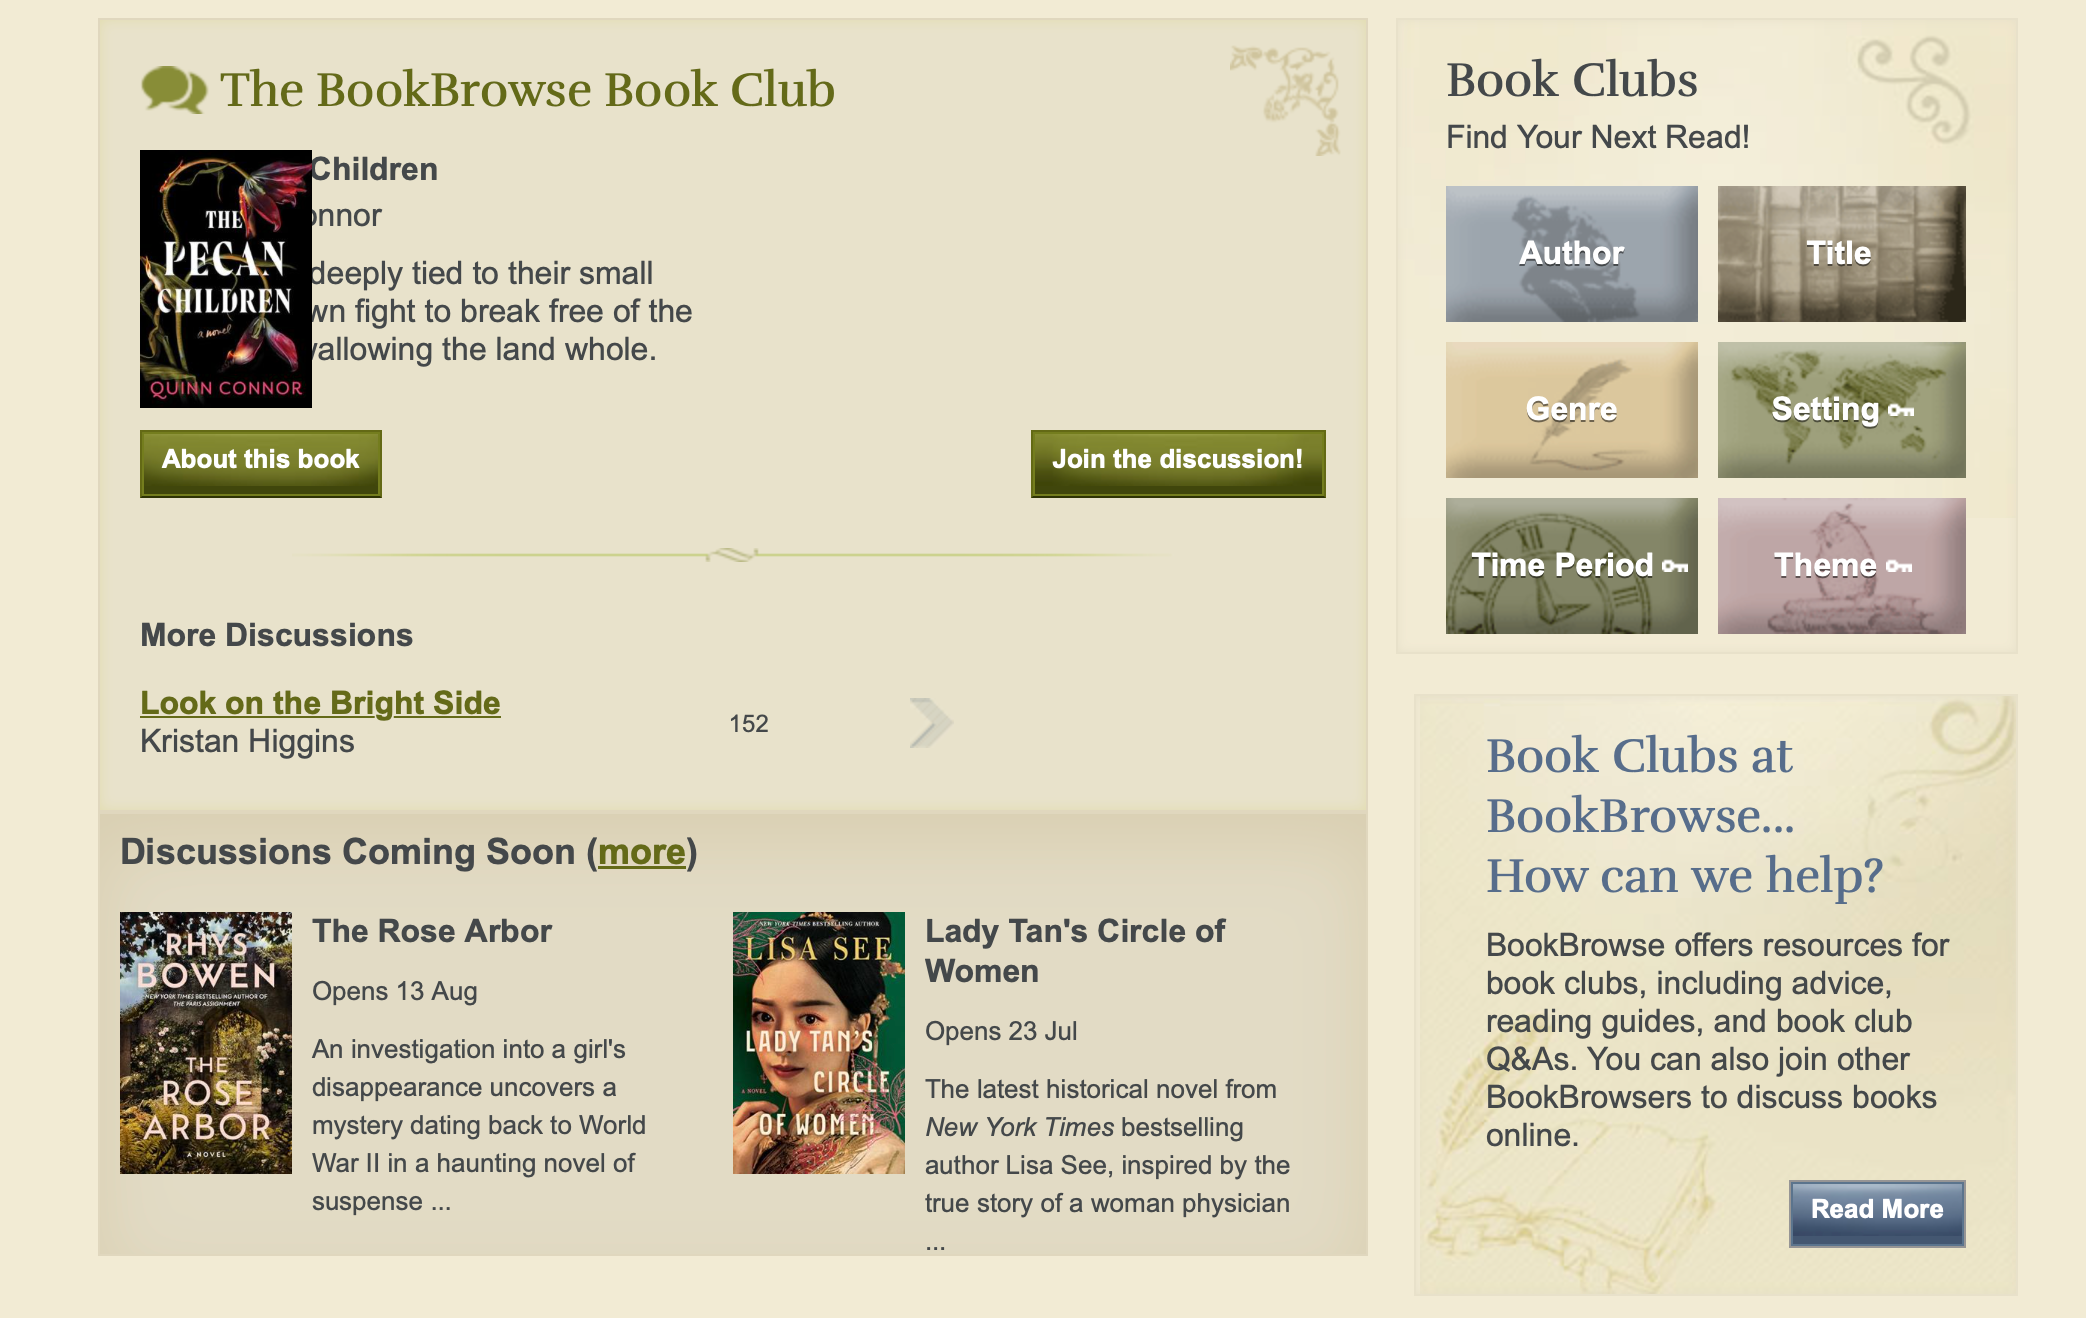 Screenshot of book clubs page on BookBrowse with monthly discussions